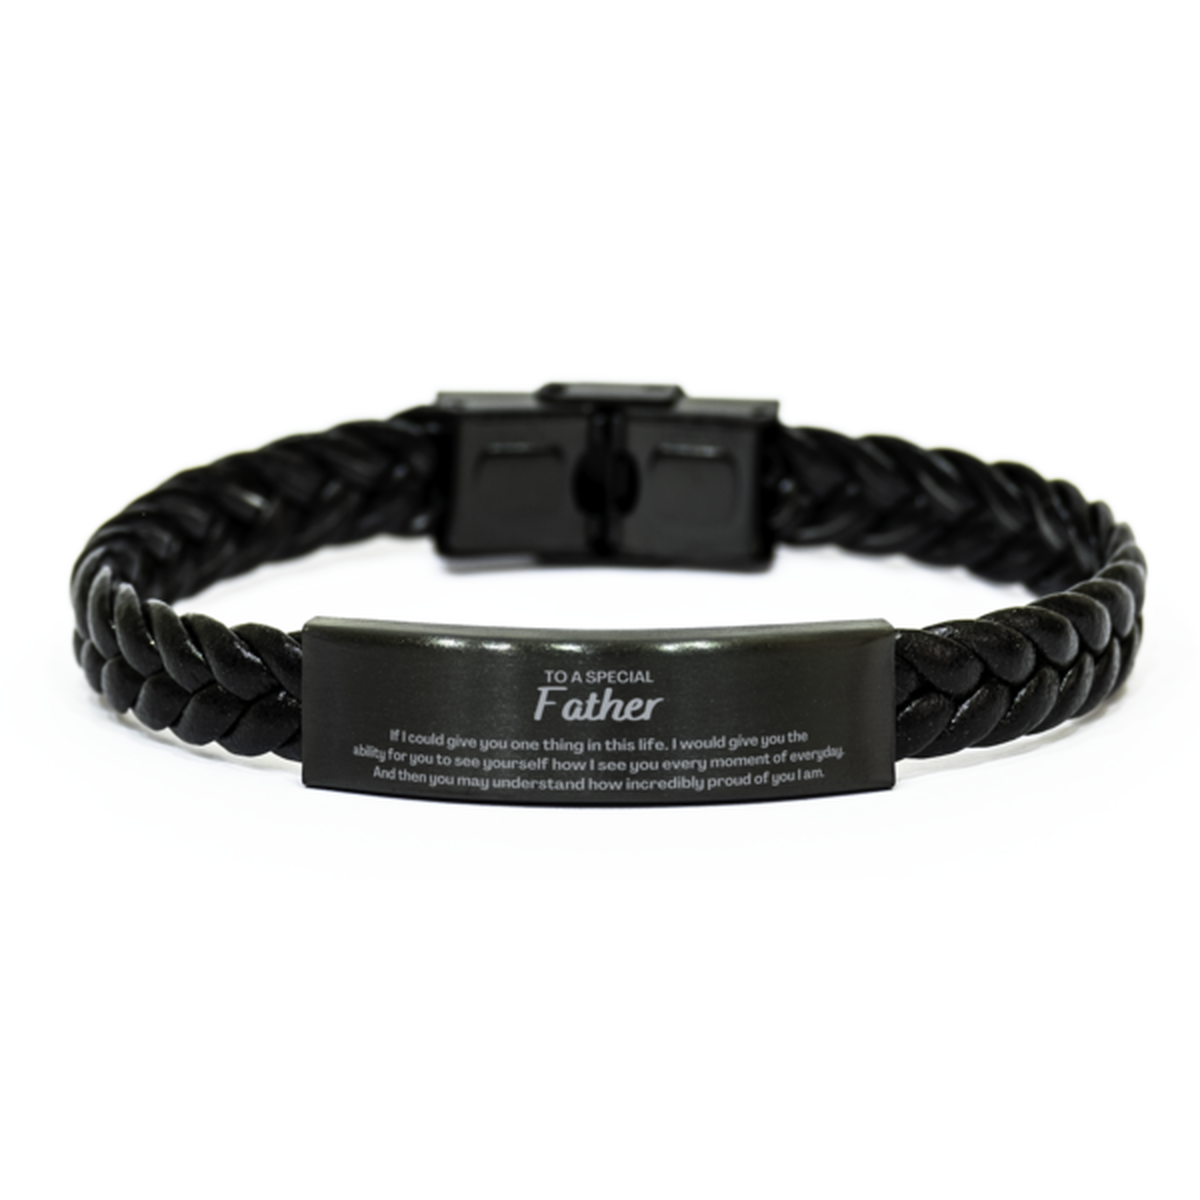 To My Father Braided Leather Bracelet, Gifts For Father Engraved, Inspirational Gifts for Christmas Birthday, Epic Gifts for Father To A Special Father how incredibly proud of you I am